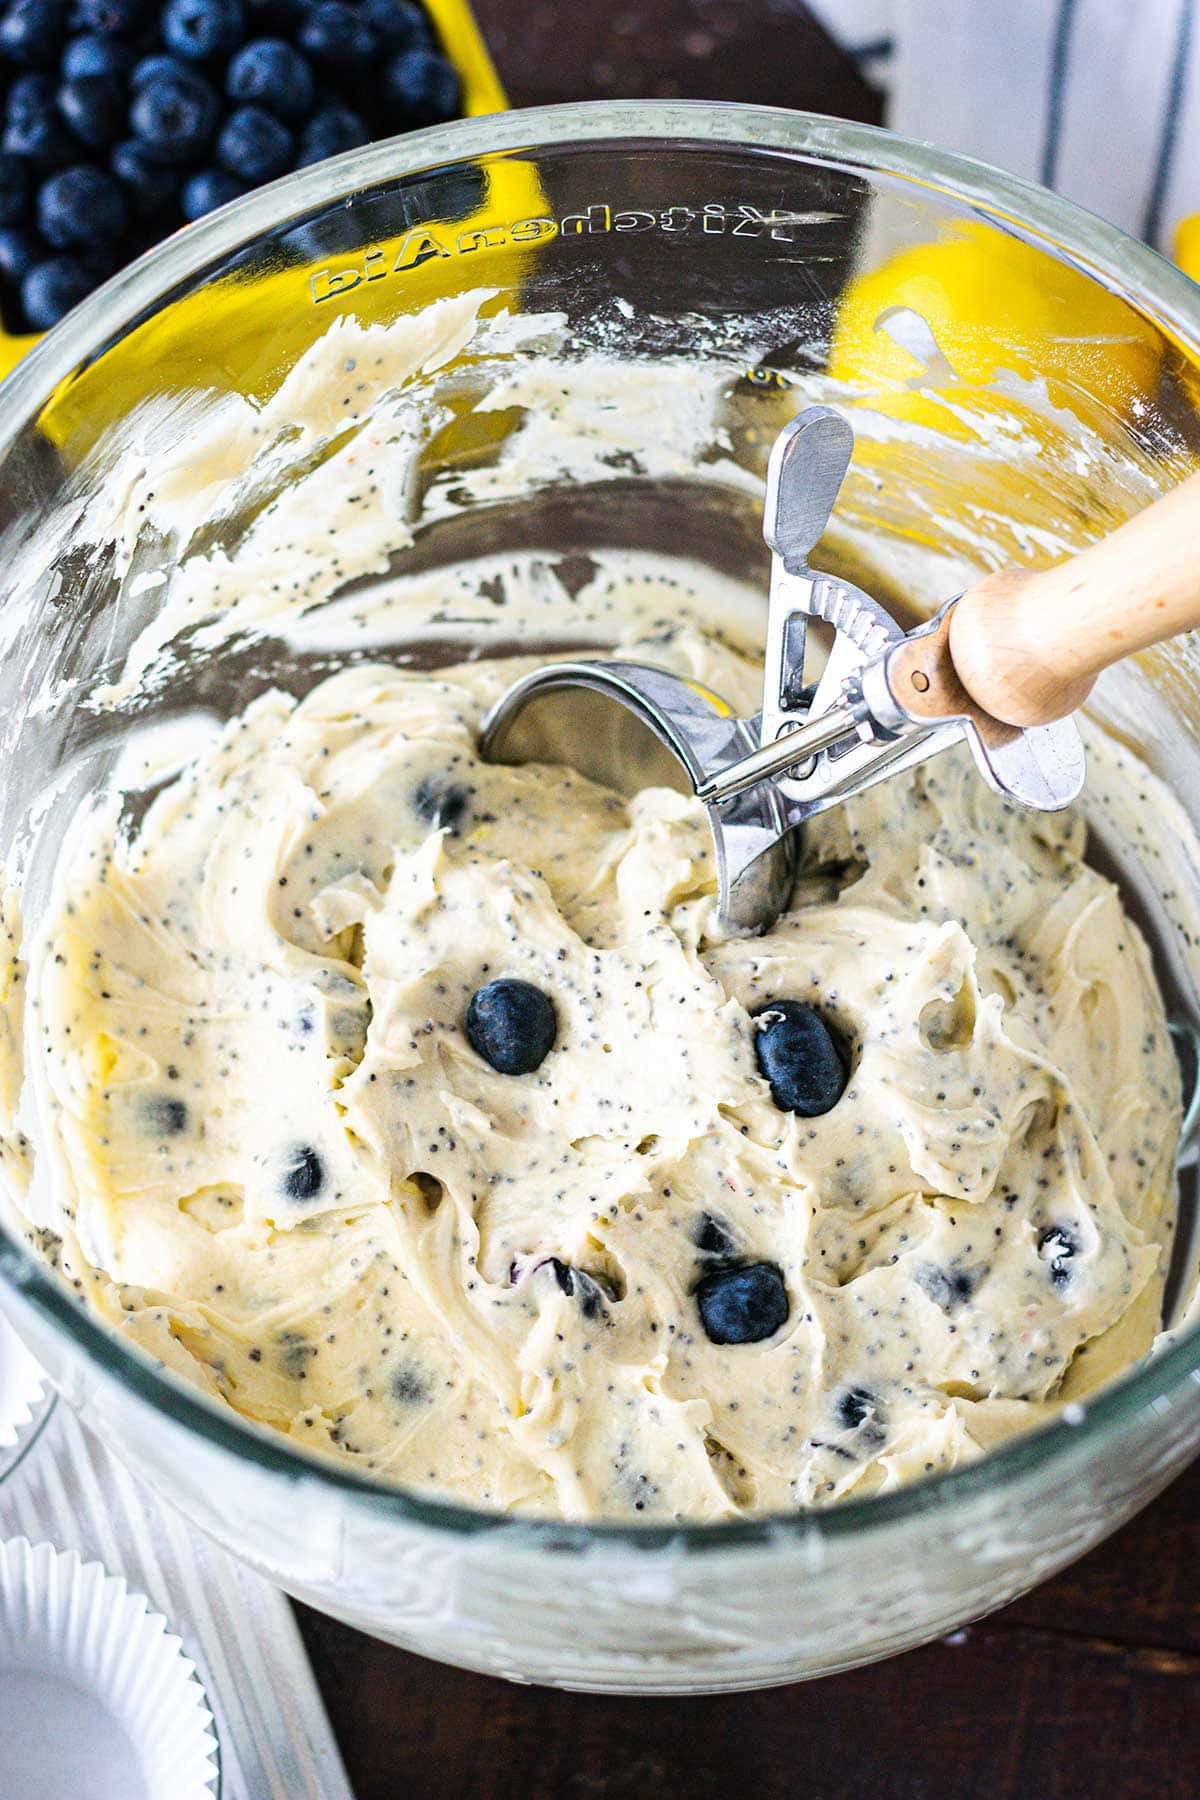 Blueberry lemon poppy seed muffin batter with an ice cream scoop in the batter bowl.